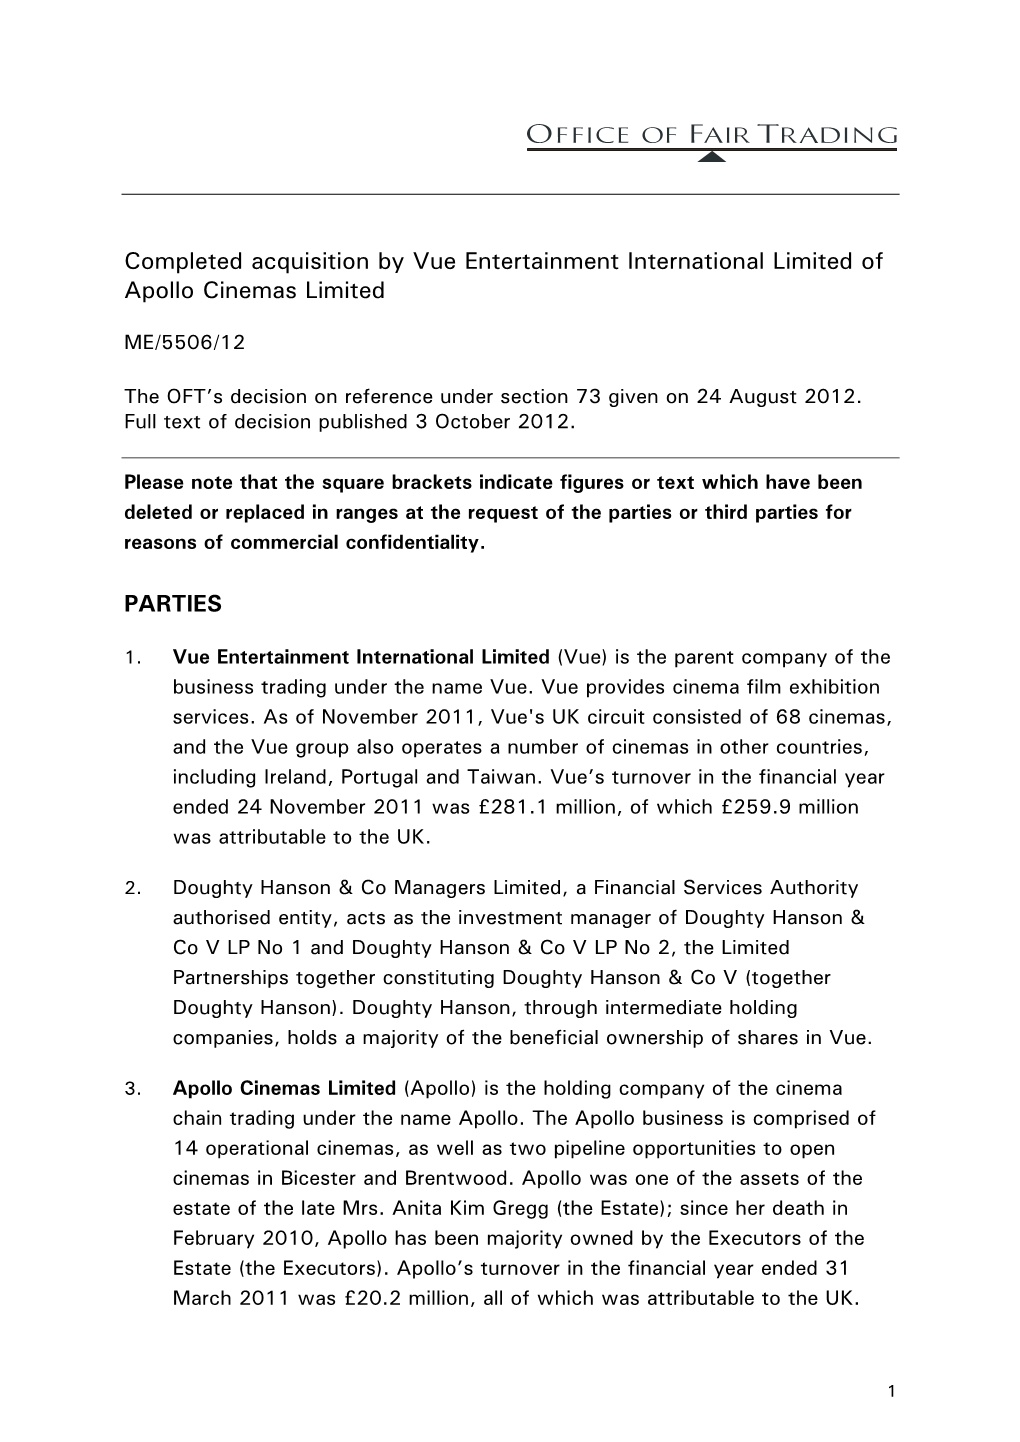 Full Text of the Decision Regarding the Completed Acquisition by Vue